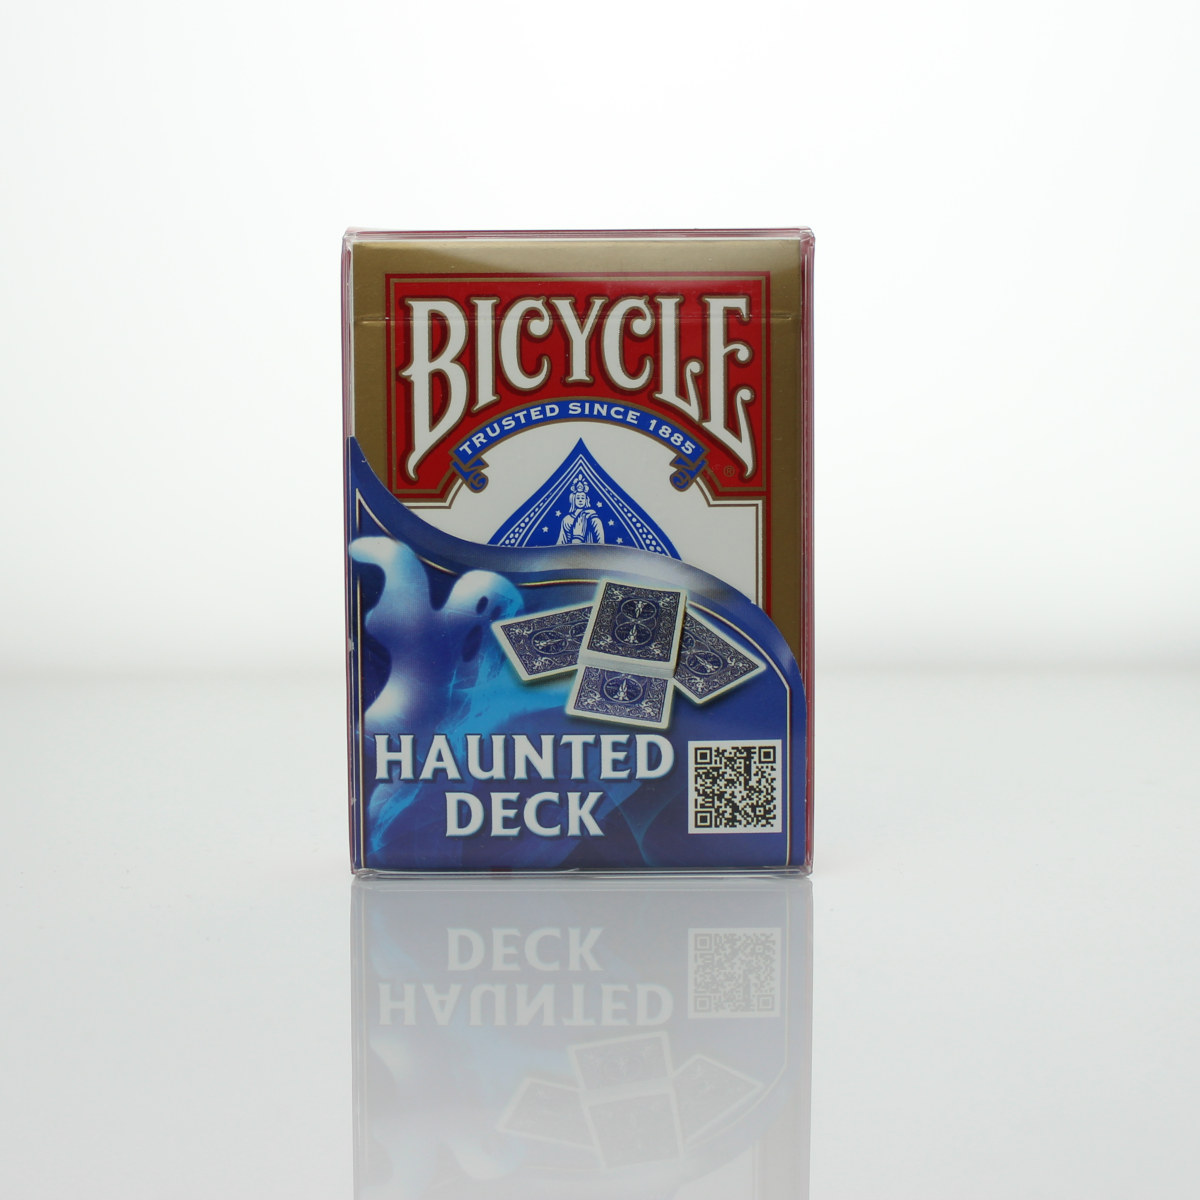 Haunted Deck - Bicycle